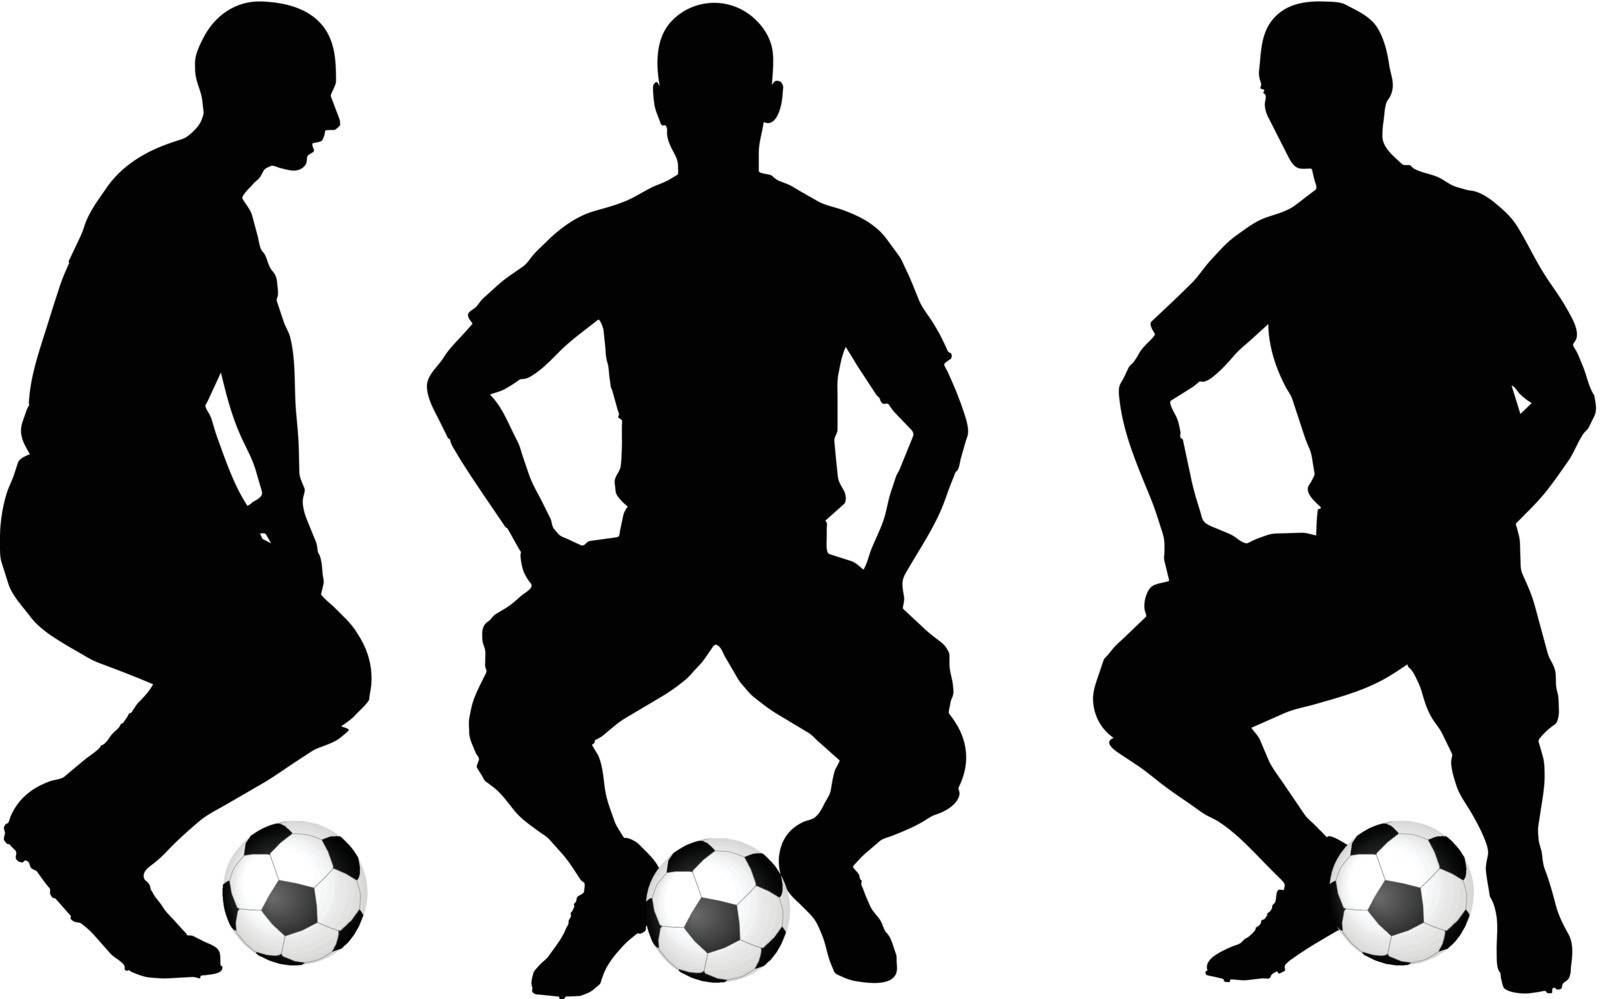 isolated poses of soccer players silhouettes in sitting position